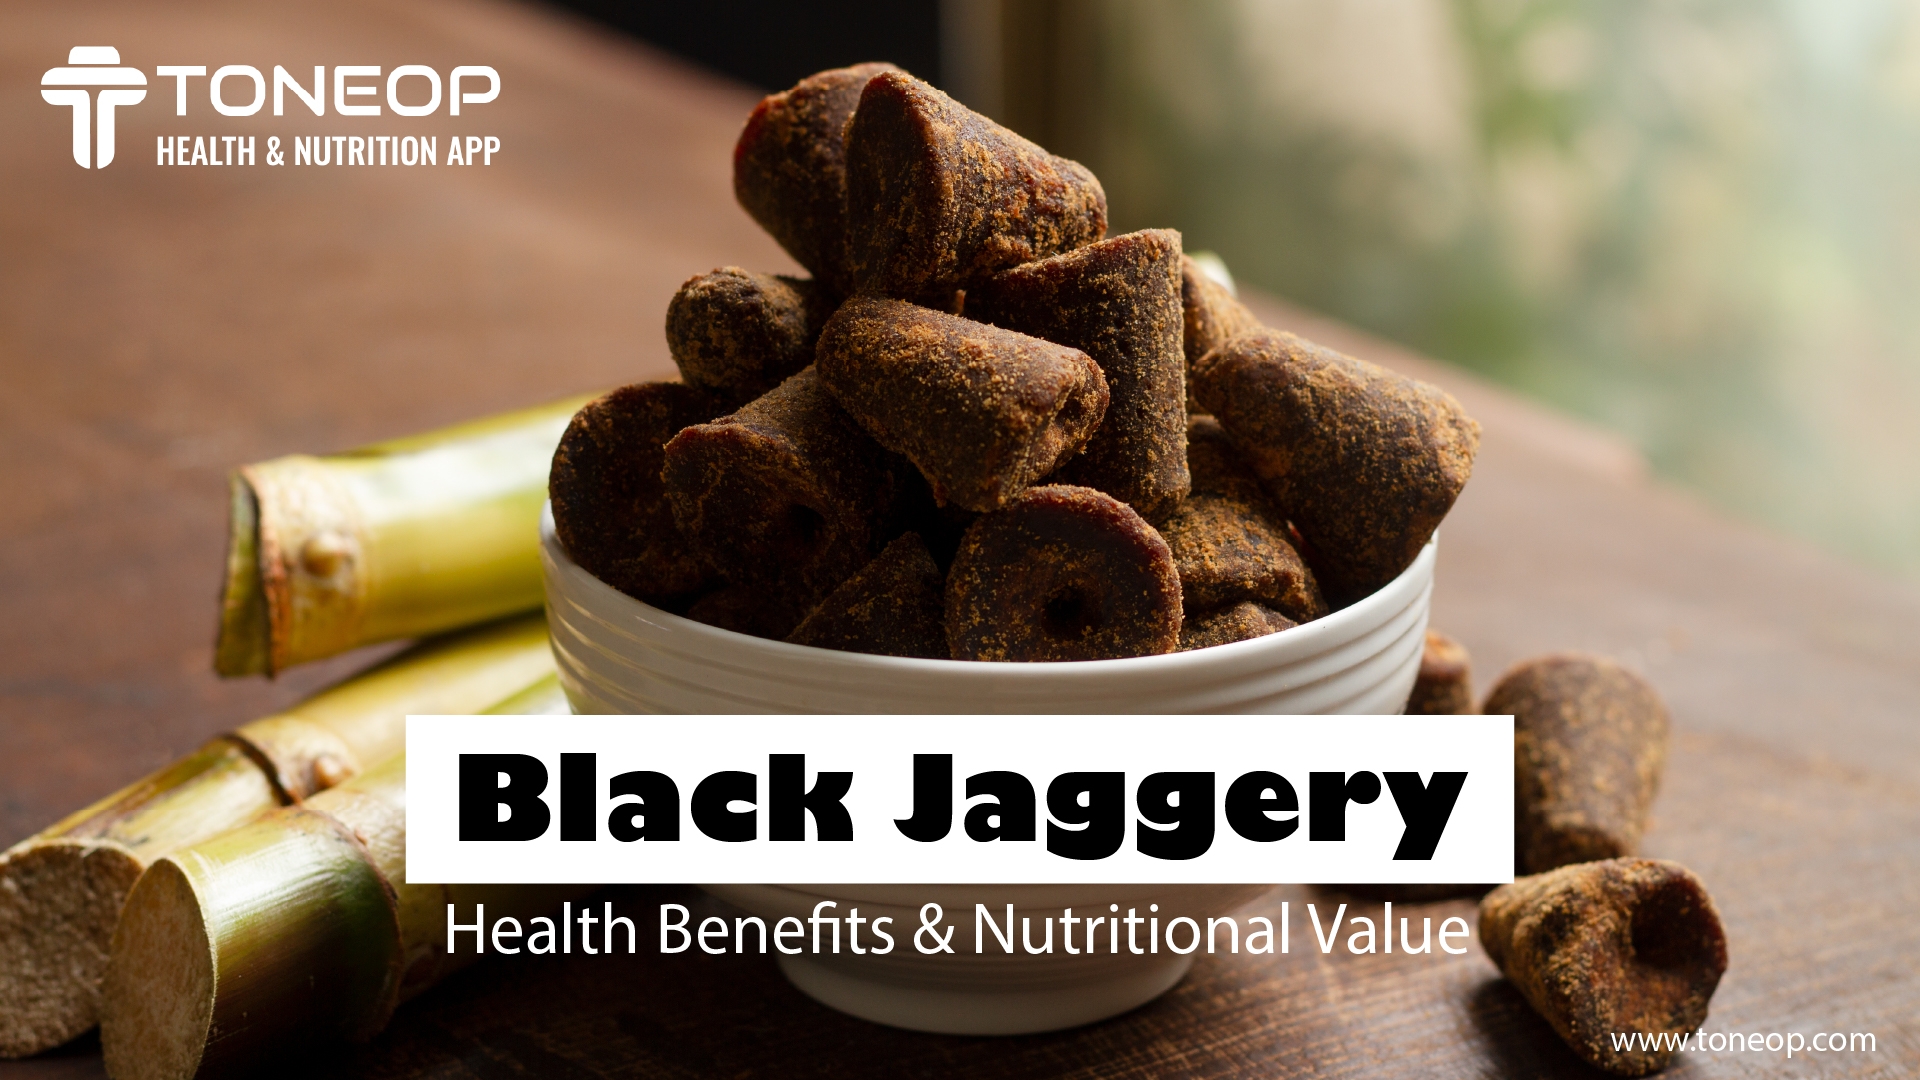 Black Jaggery: Health Benefits And Nutritional Value